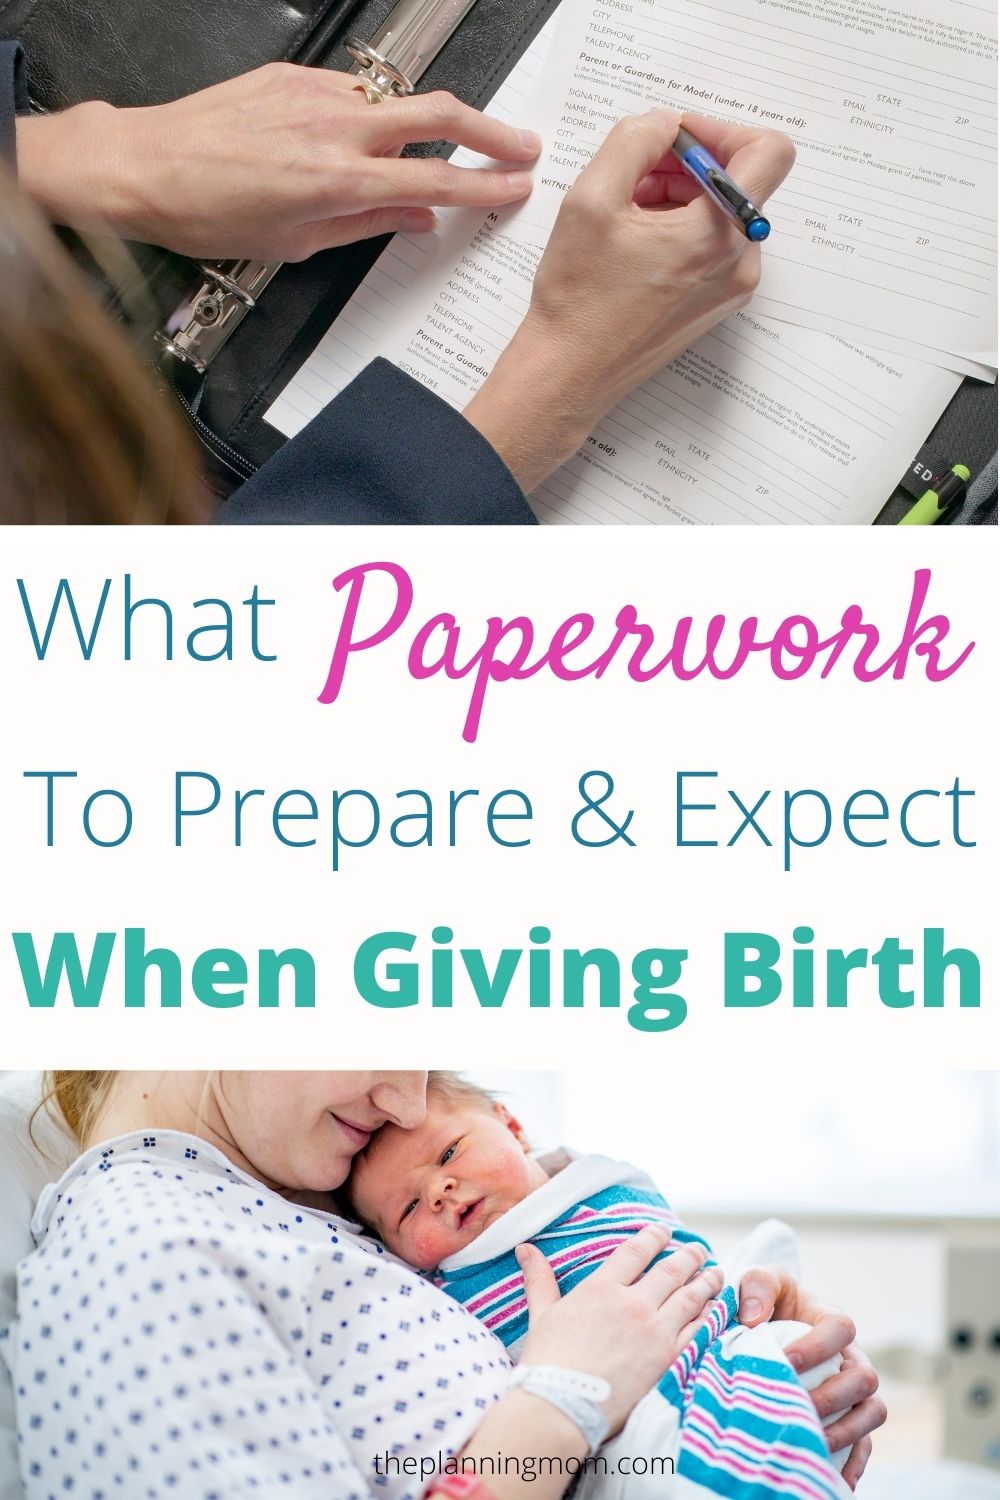 Adjusting to life with a new baby: 15 practical tips, Labour & birth  articles & support